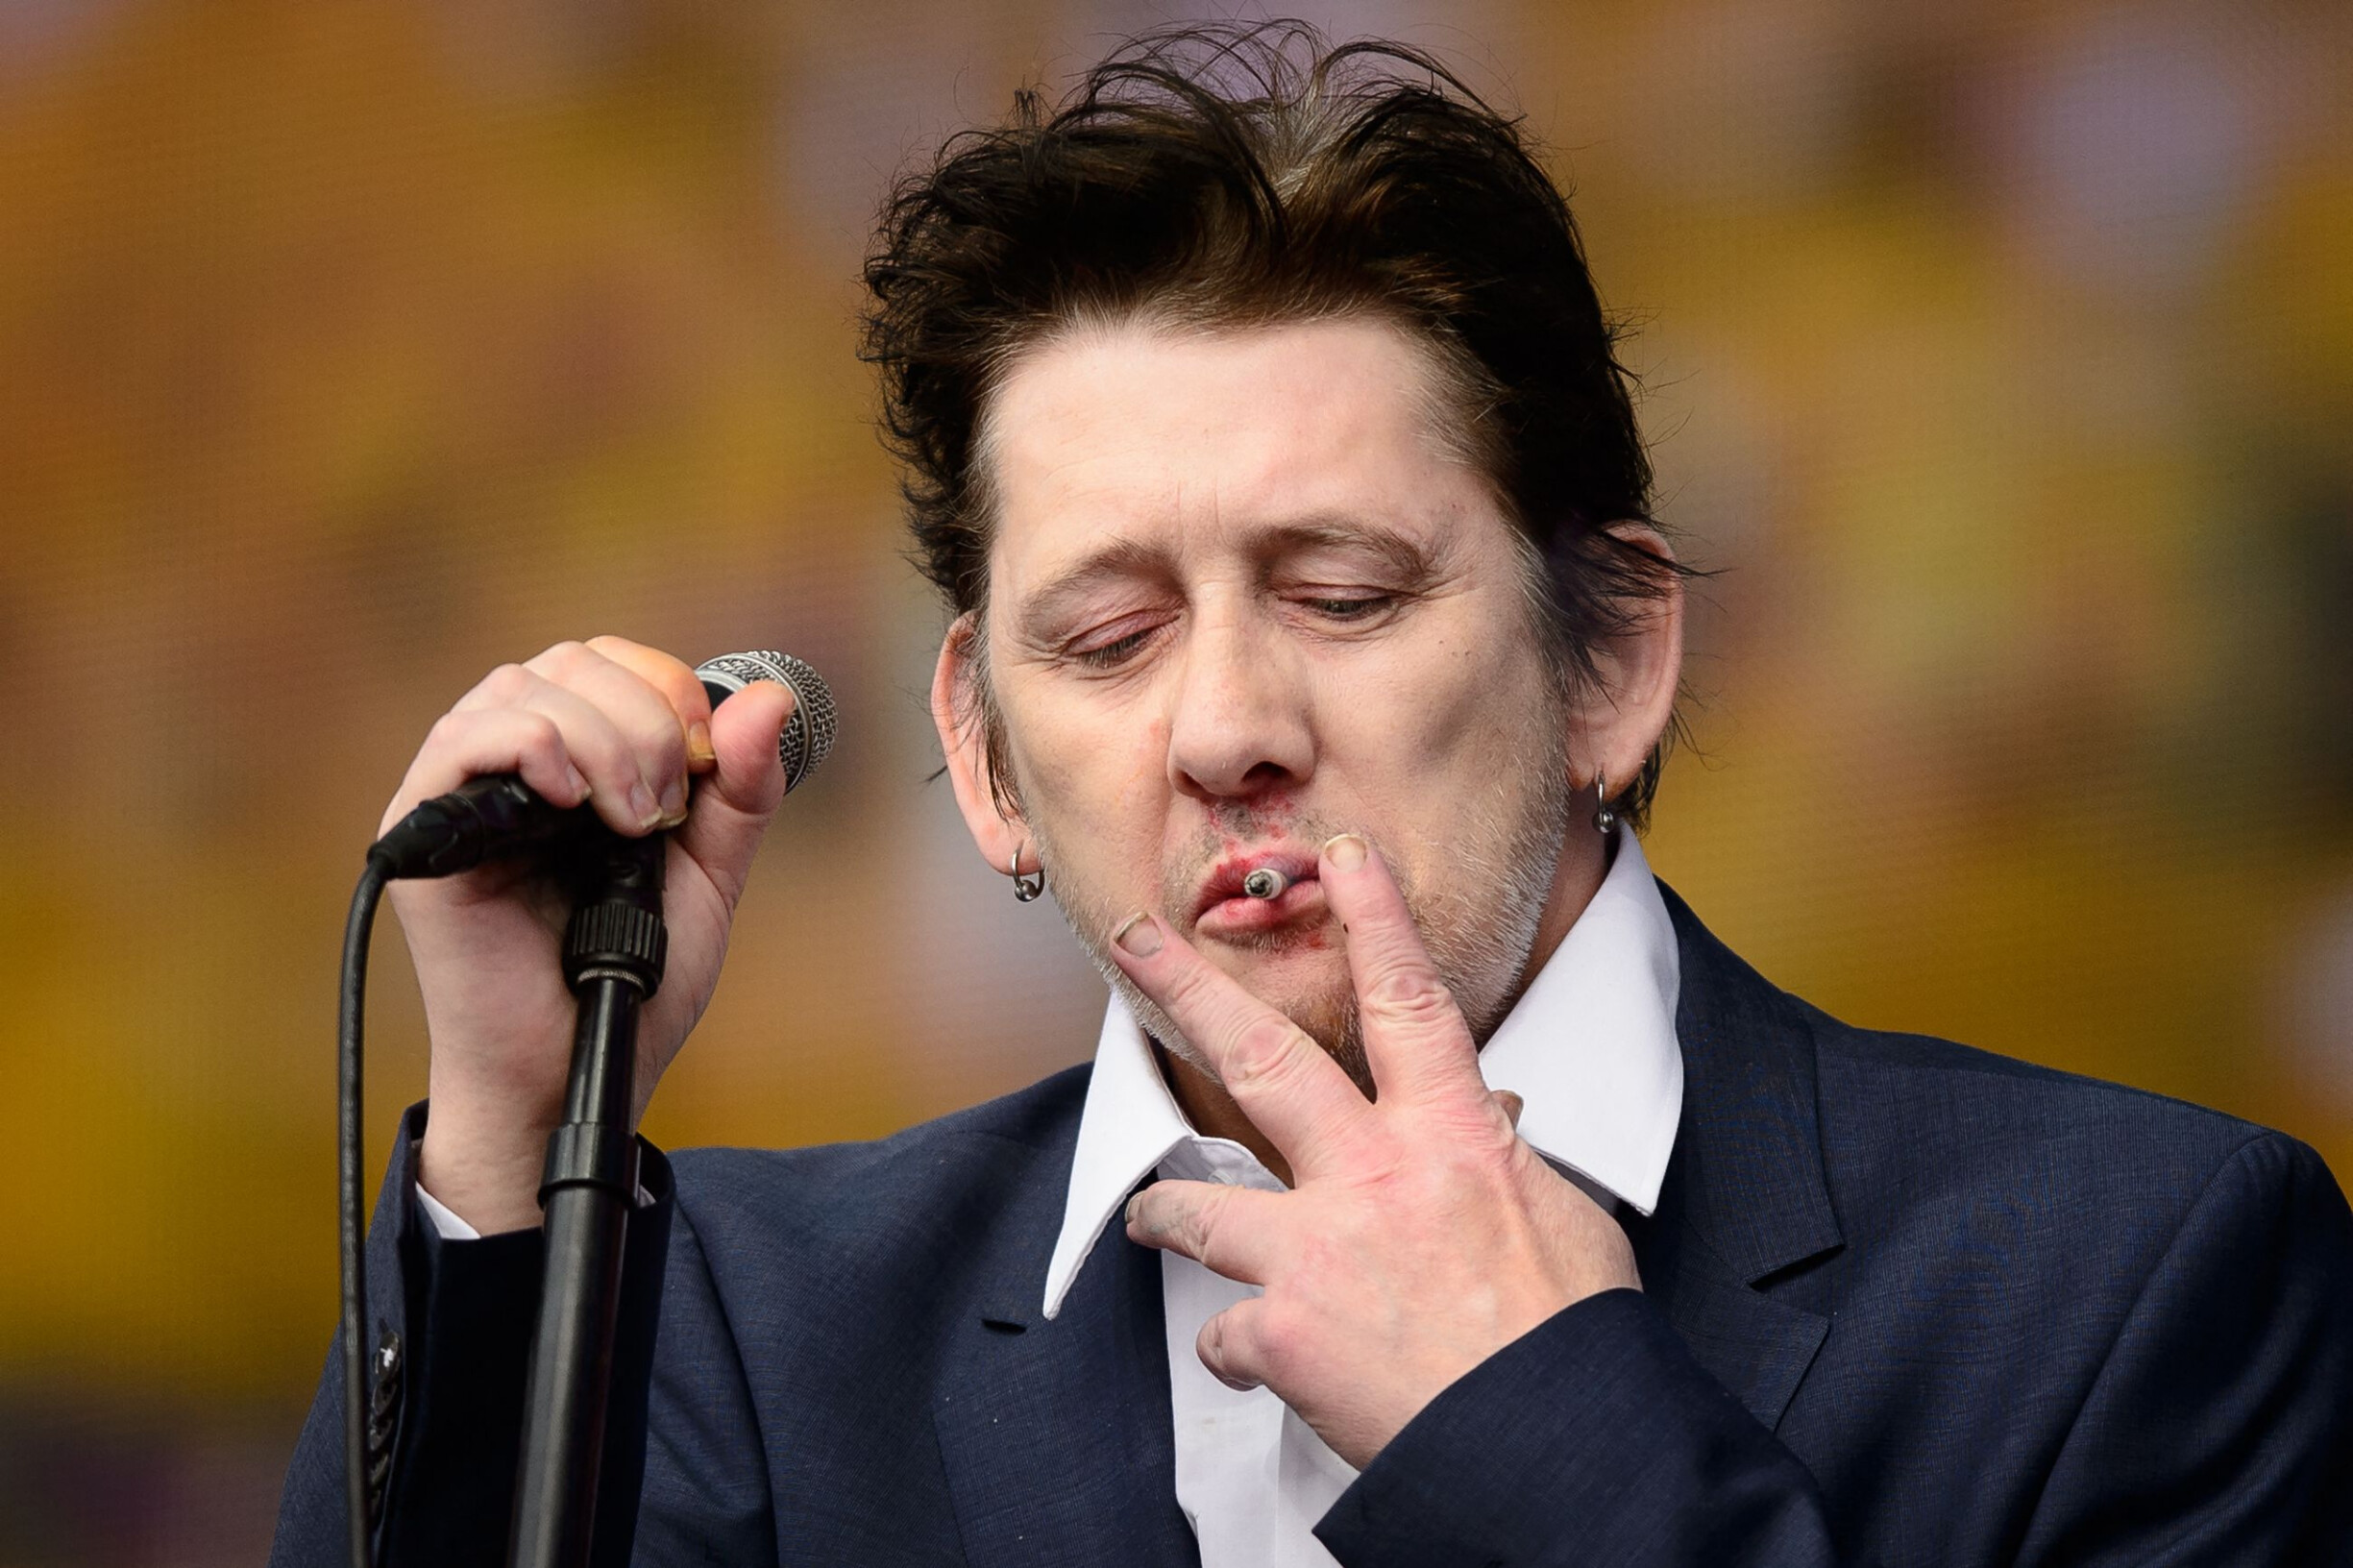 Shane MacGowan, the voice of Celtic punk, has fallen silent at the age of 65